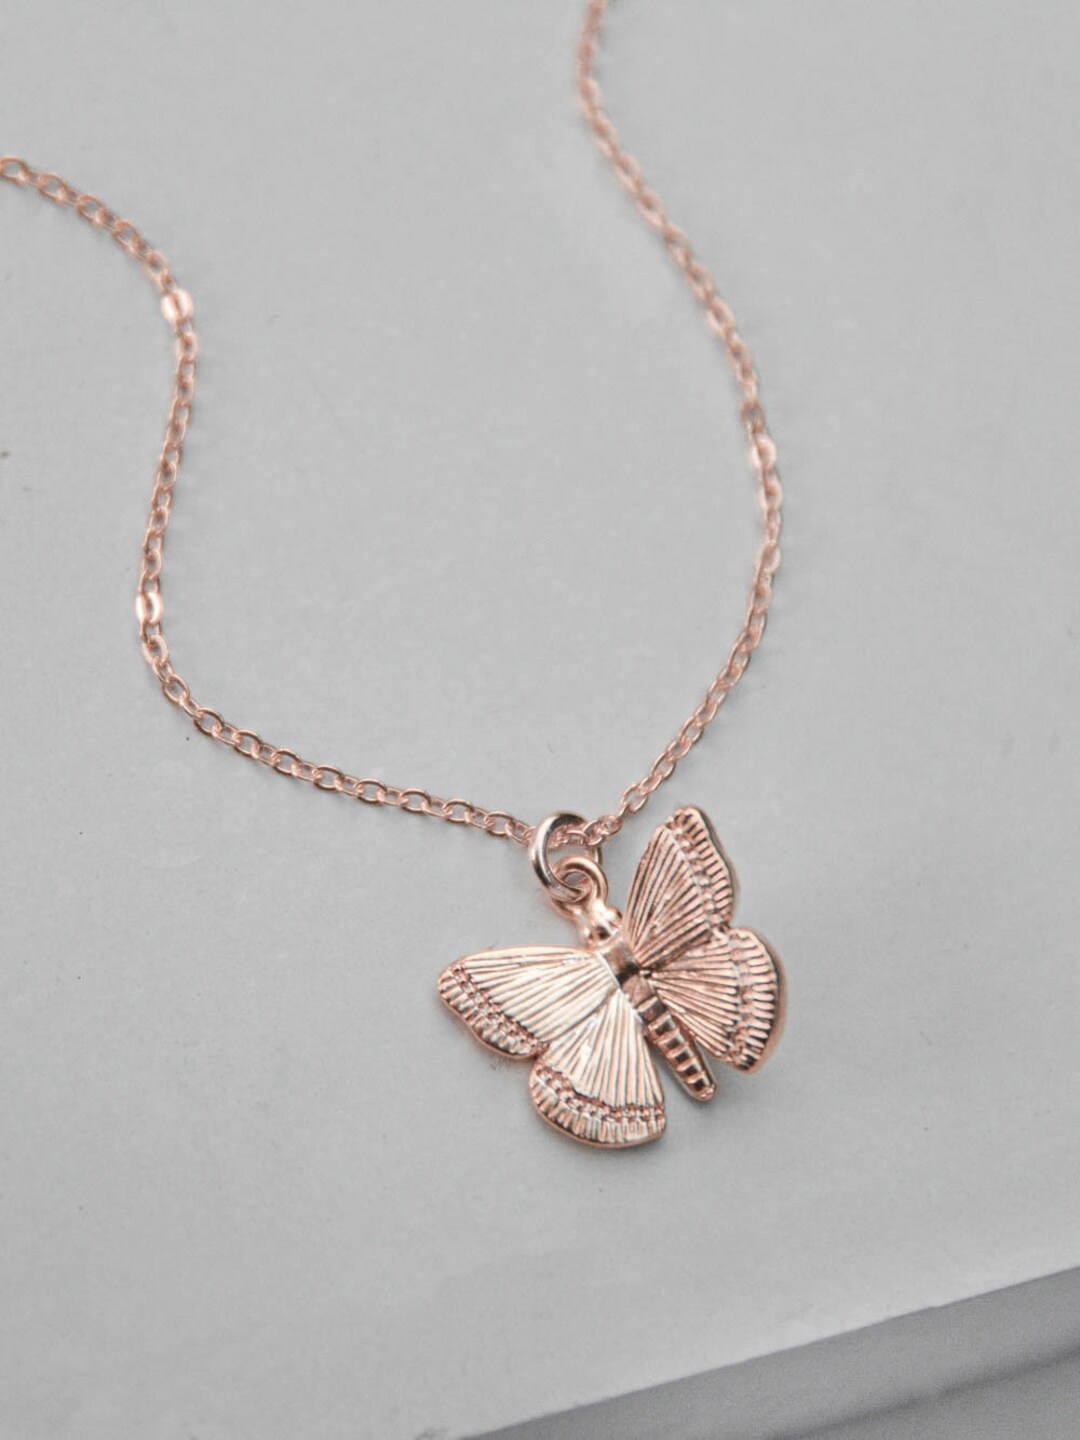 Butterfly Necklace ROSE GOLD Butterfly Charm Necklace - Etsy